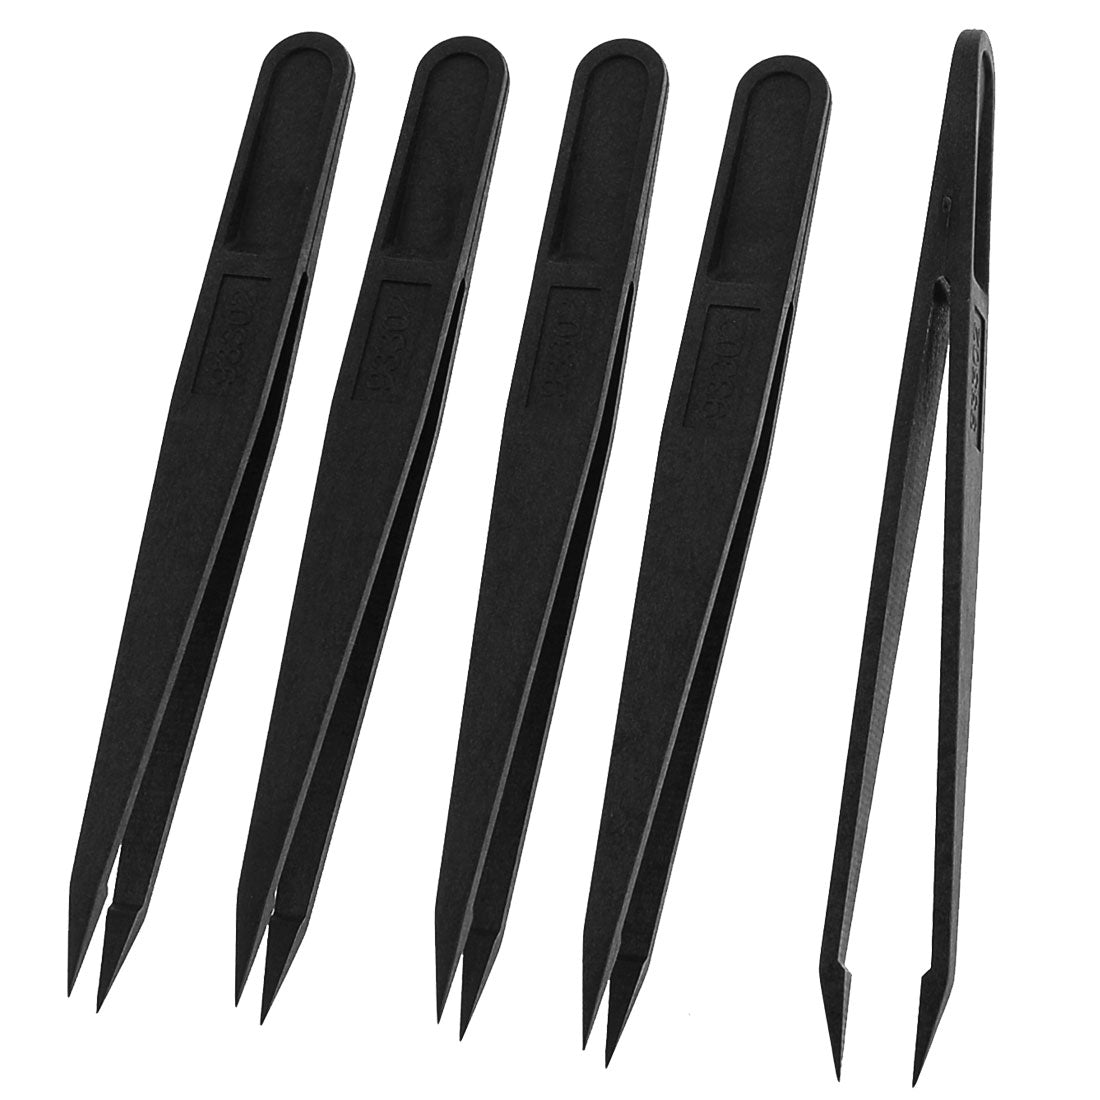 uxcell Uxcell 5 Pcs Black Plastic Antistatic Antimagnetic Pointed Tip Tweezers 4.5" Long